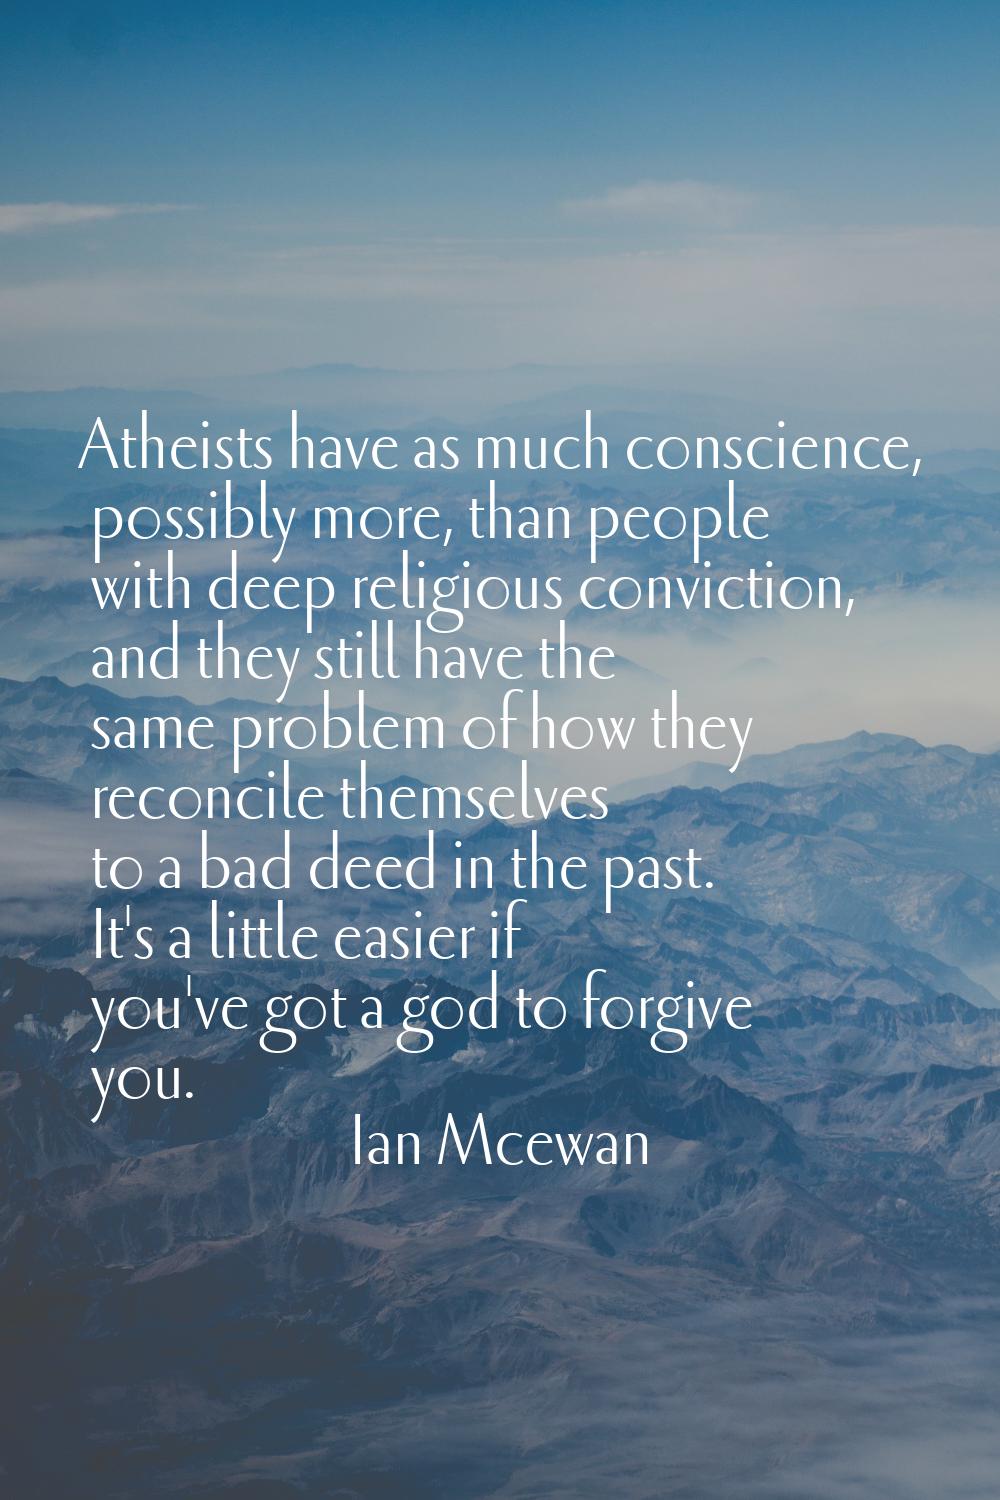 Atheists have as much conscience, possibly more, than people with deep religious conviction, and th